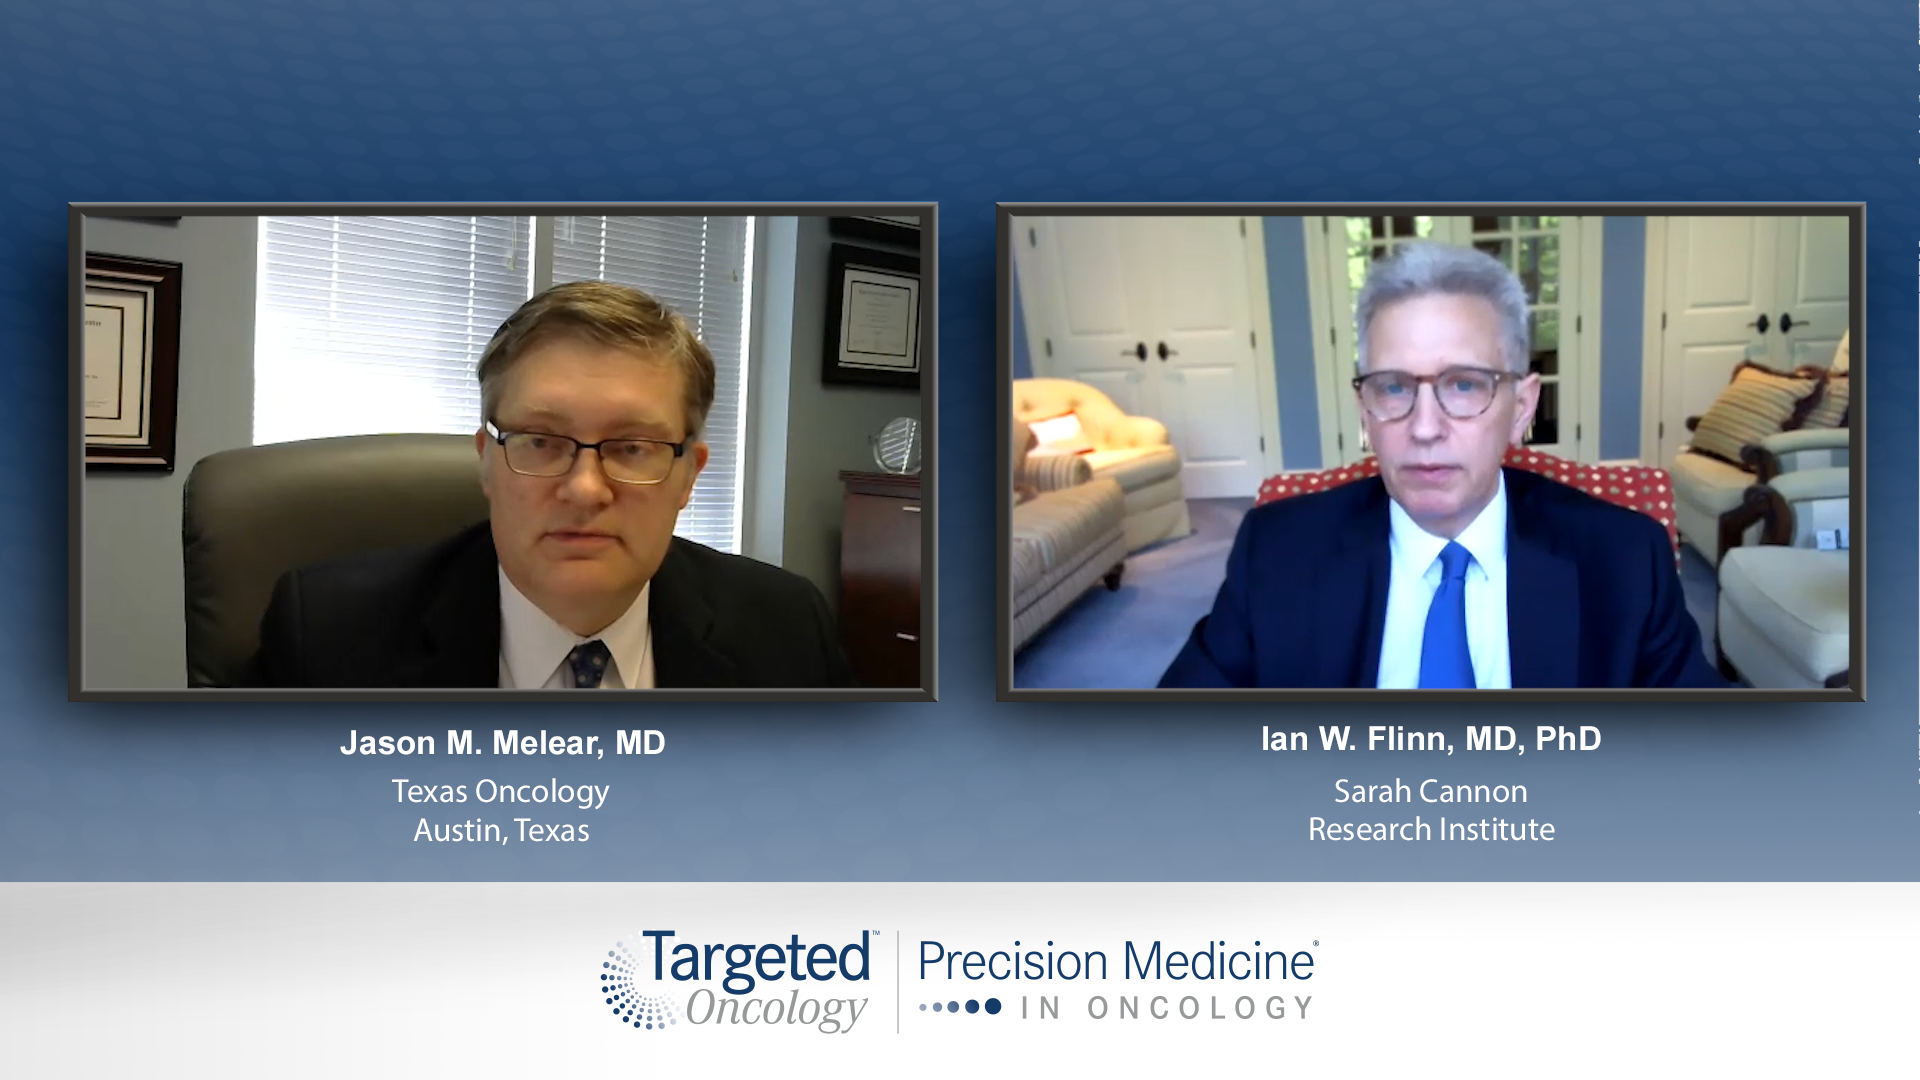 Clinical Trials with Early PI3K Inhibitors in R/R FL and MZL